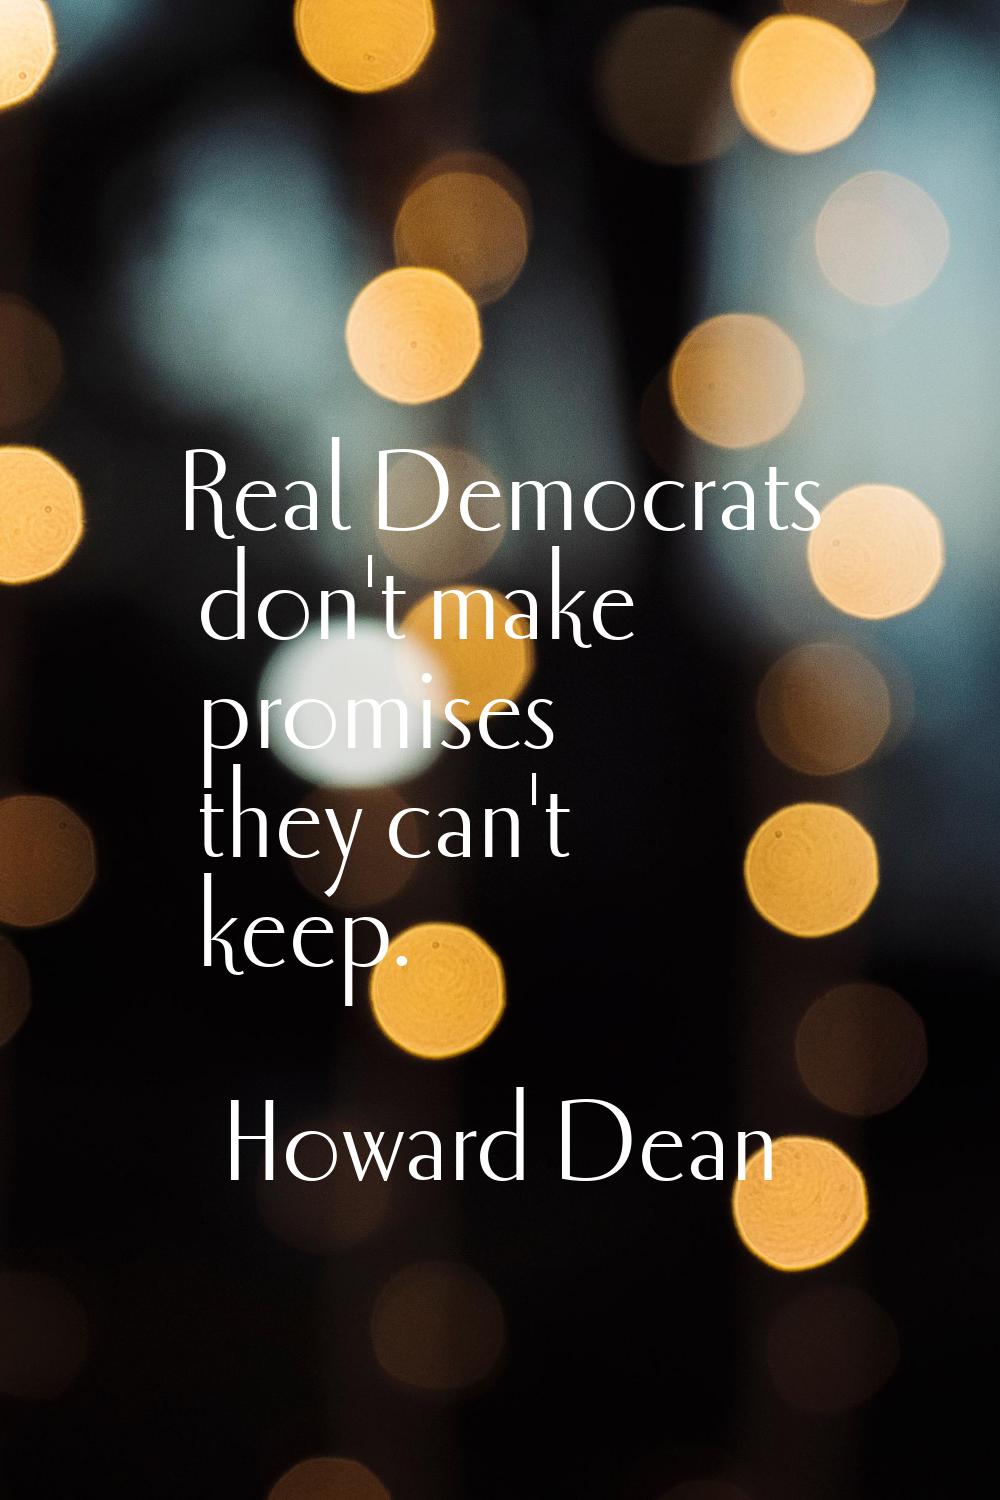 Real Democrats don't make promises they can't keep.